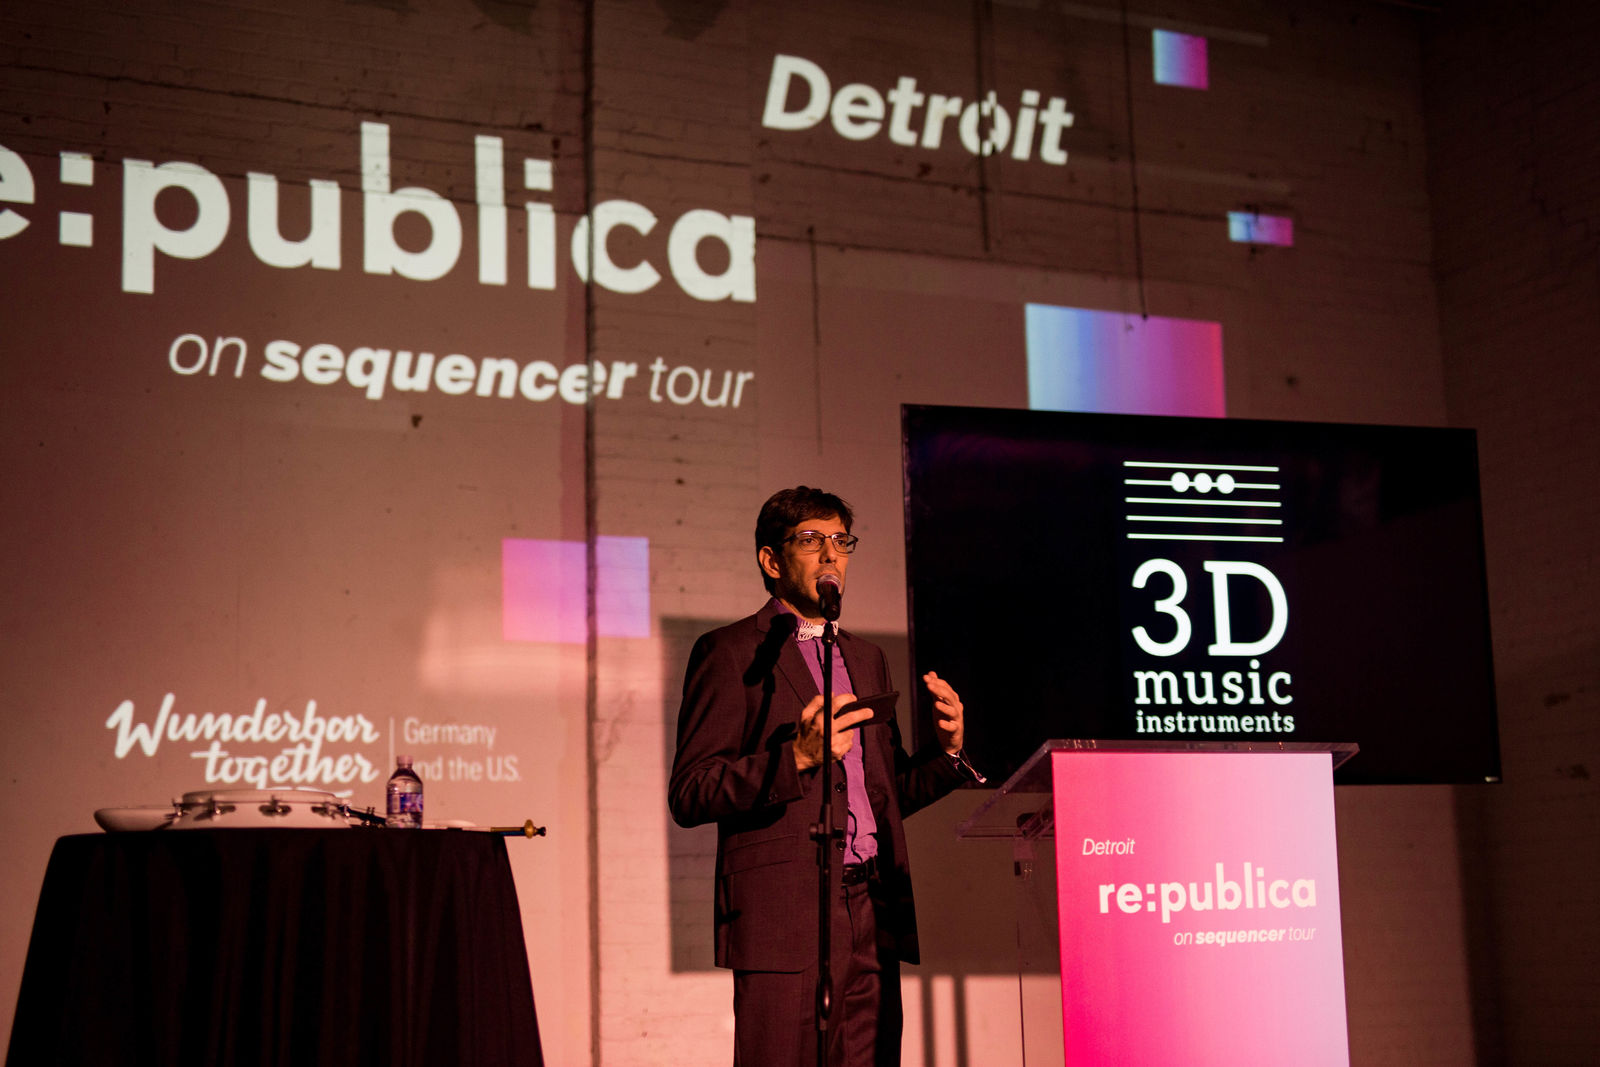 Europe’s largest internet and digital society conference in the U.S.: Volkswagen supports re:publica in Detroit